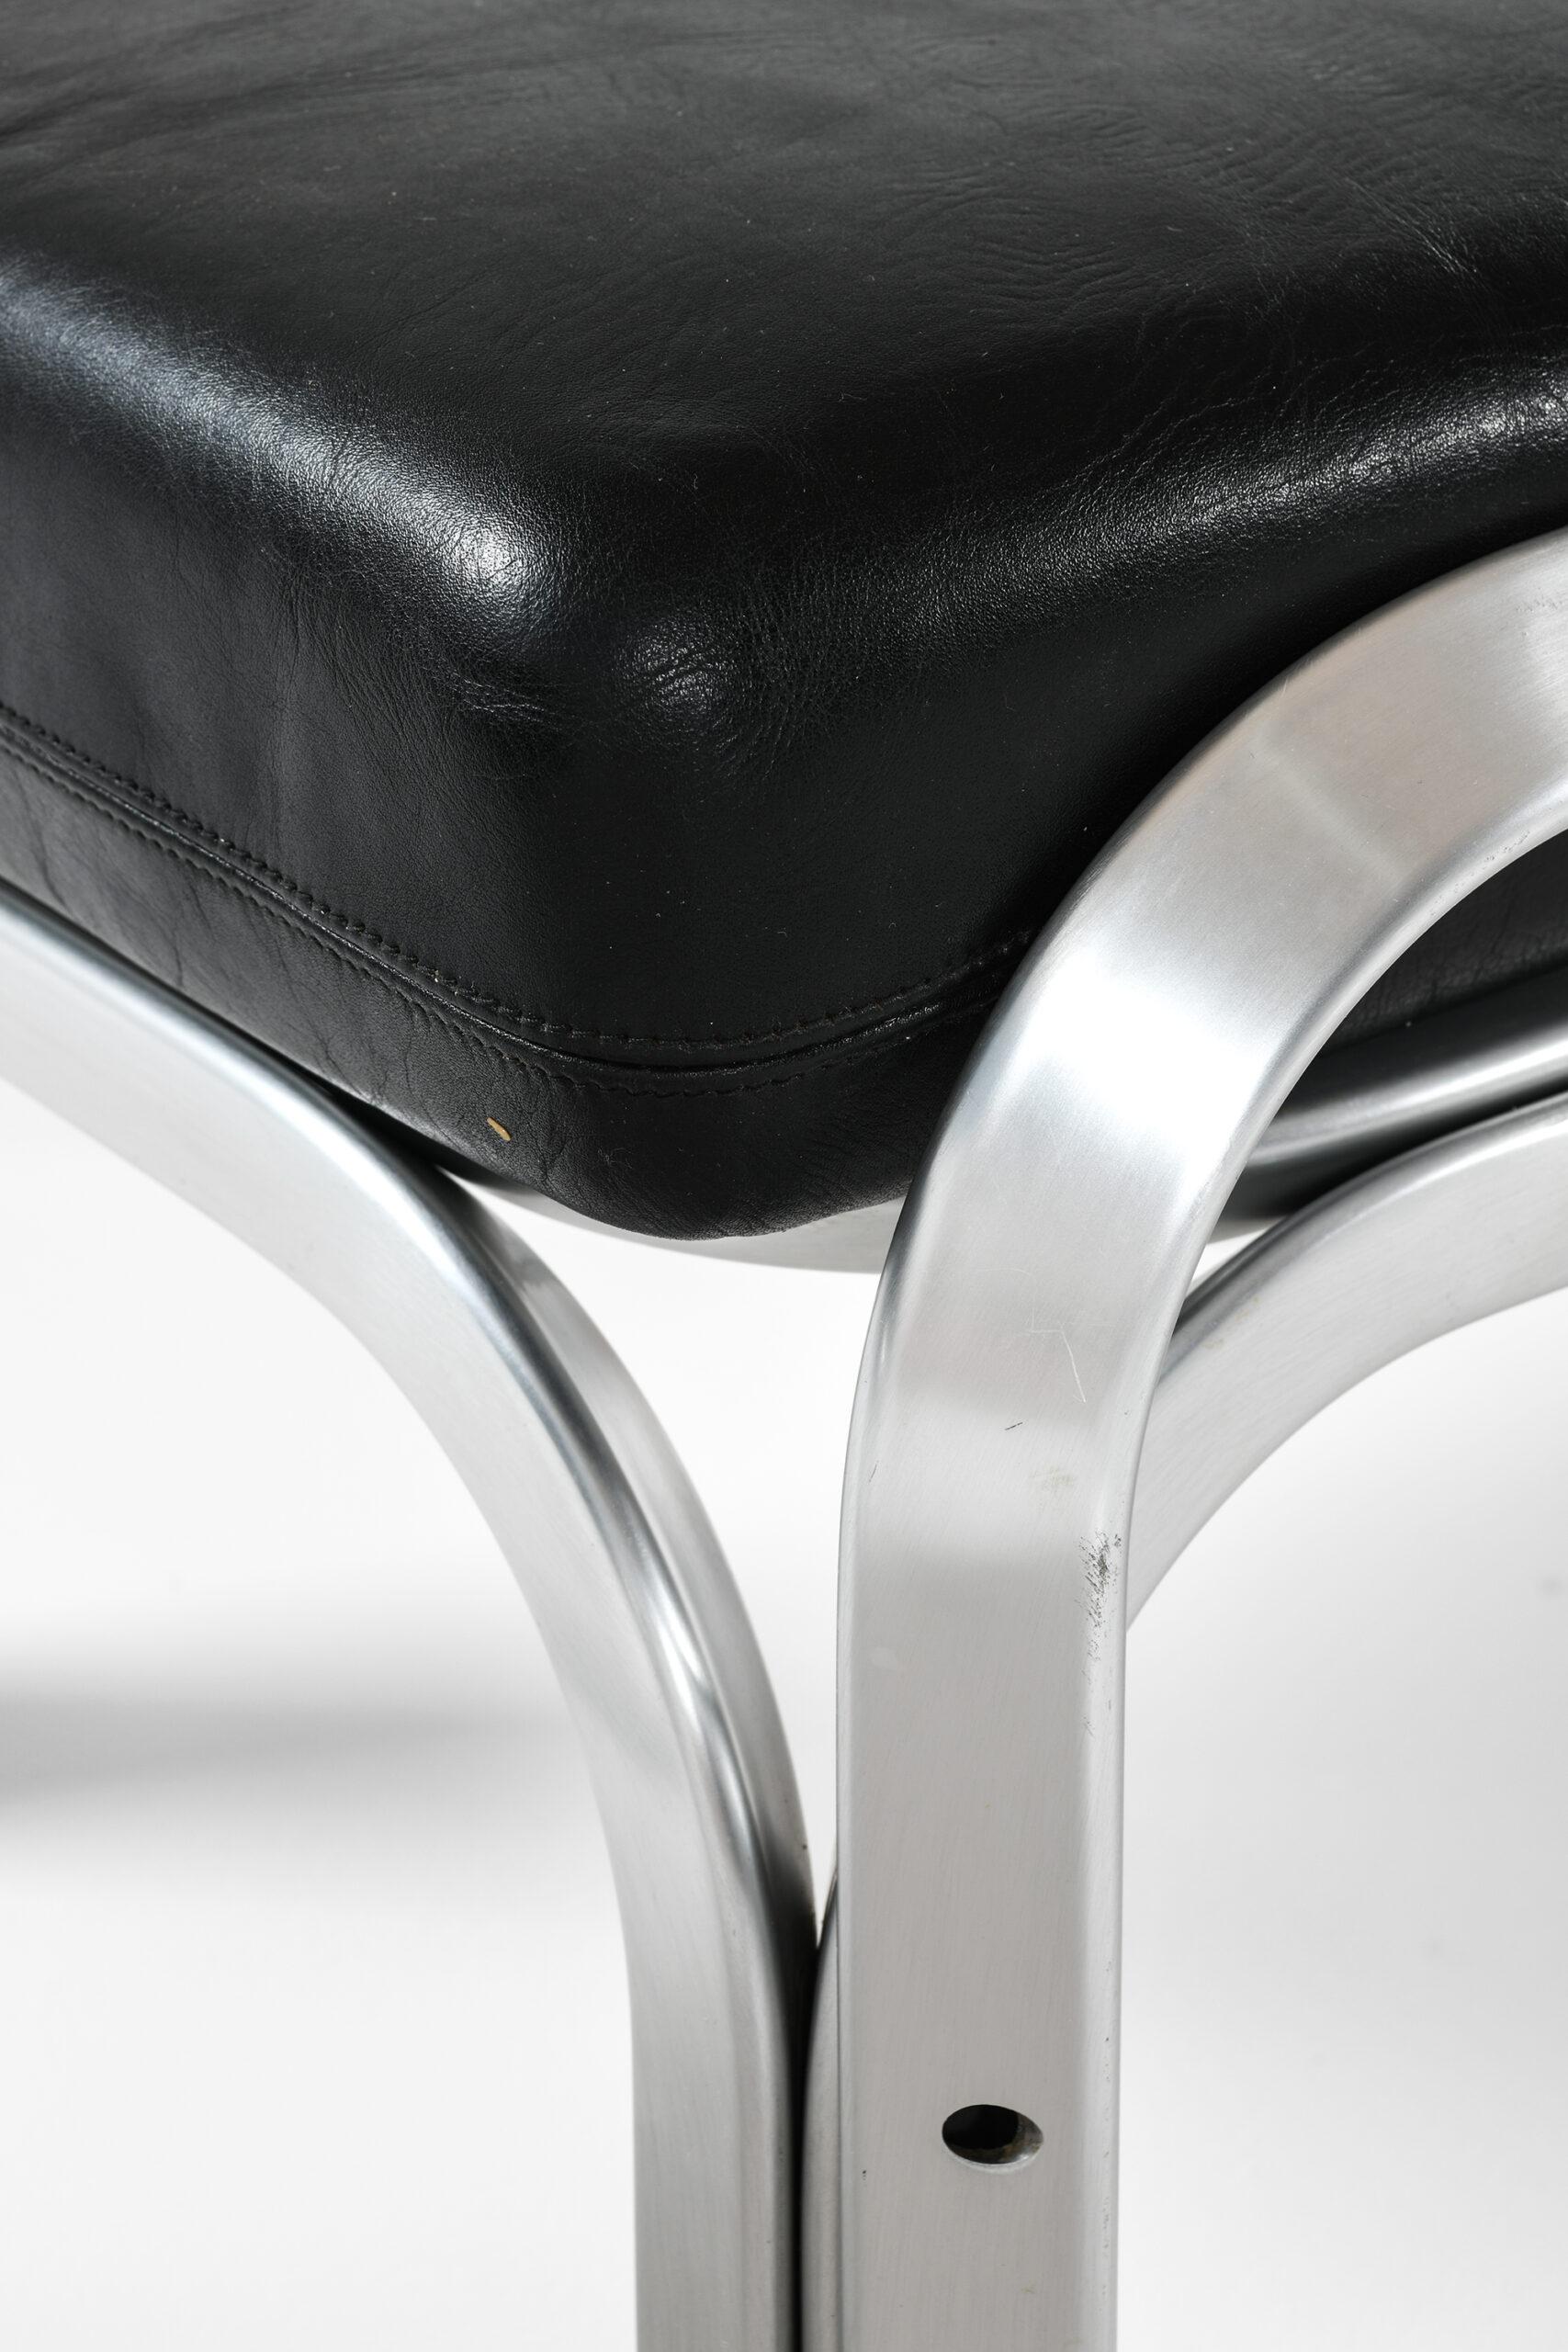 Leather Jørn Utzon Seating Group Produced by Fritz Hansen For Sale